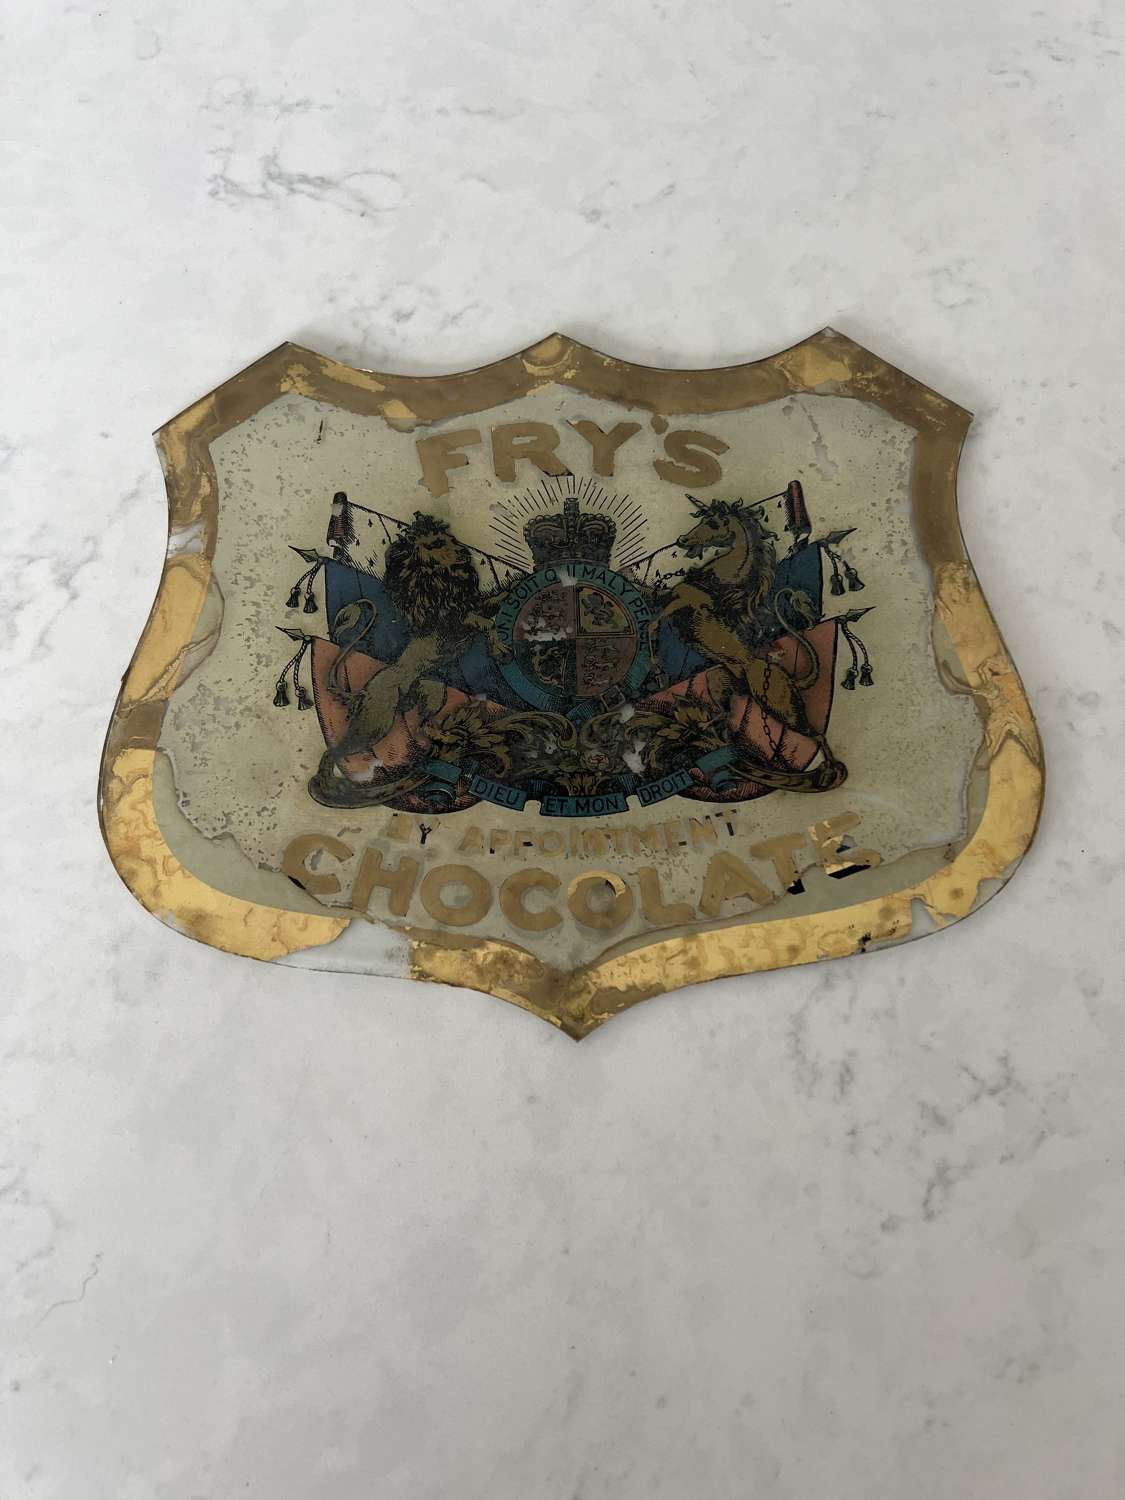 Late Victorian Glass Advertising By Appt Shield for Frys Chocolate